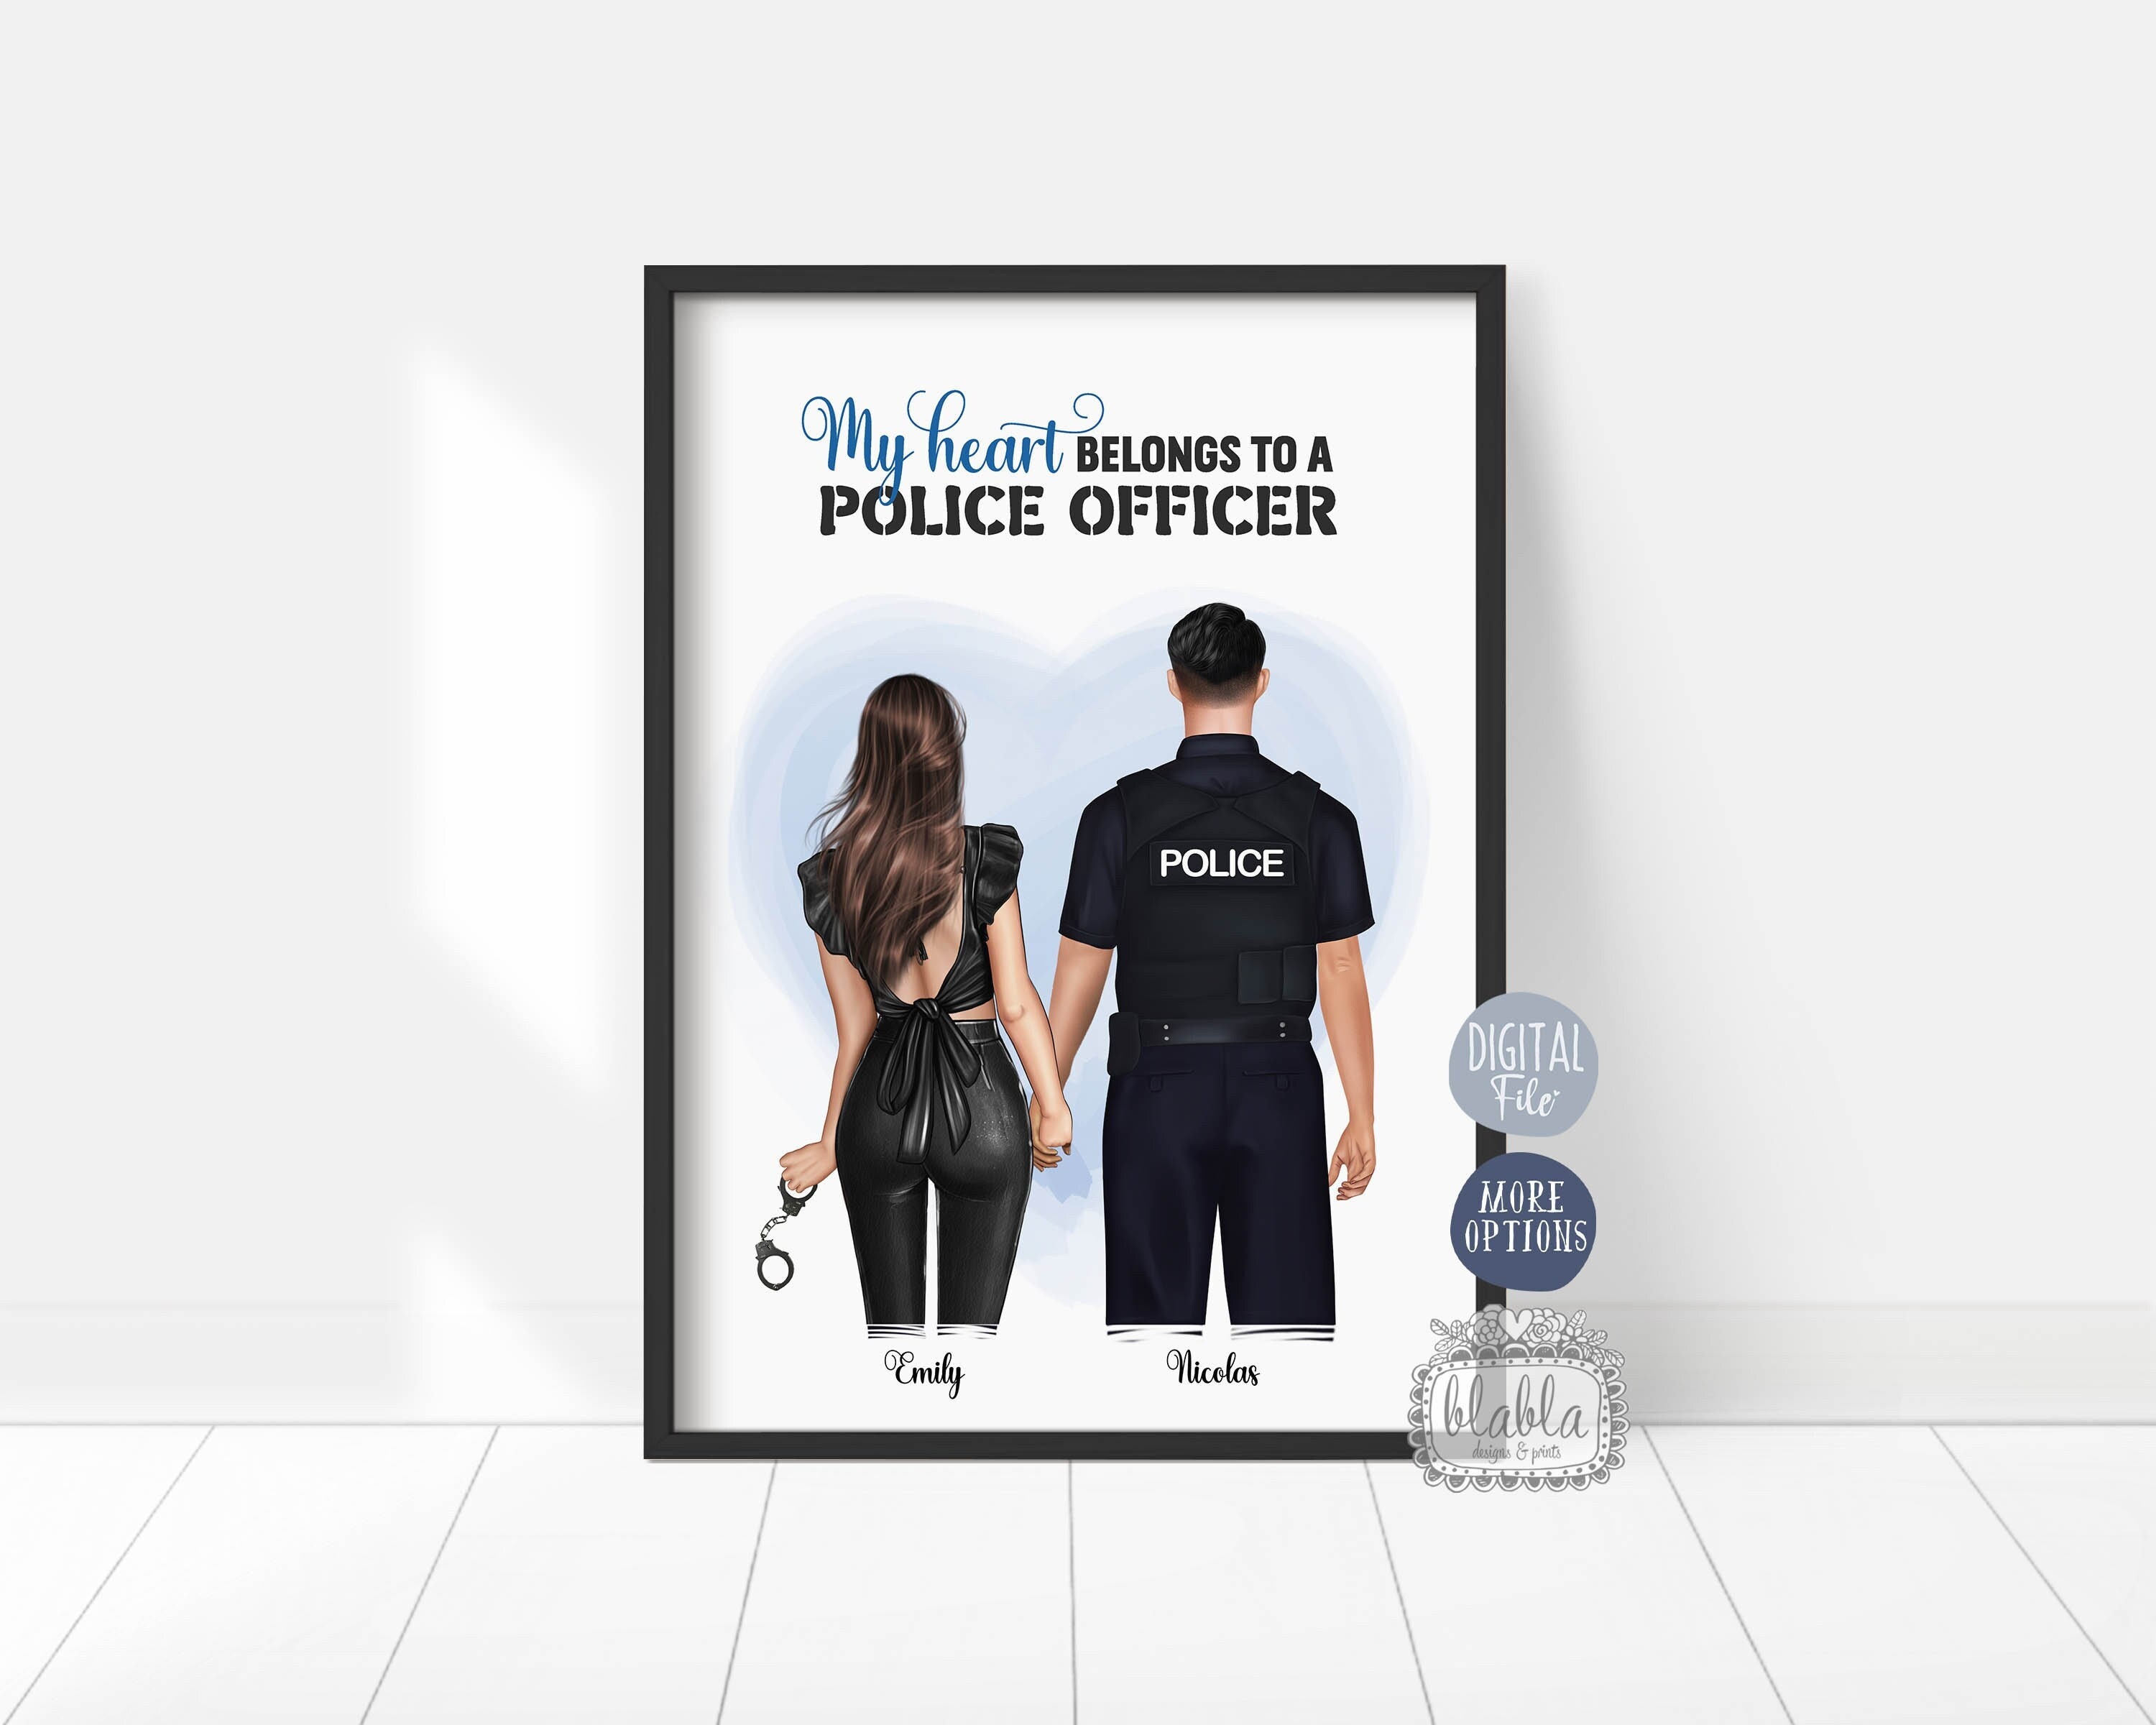 Police Officer Gifts Being a Cop is Like Riding a Bike Funny Police Gifts  Law Enforcement Policeman Gift Cop Gifts Cop Birthday 